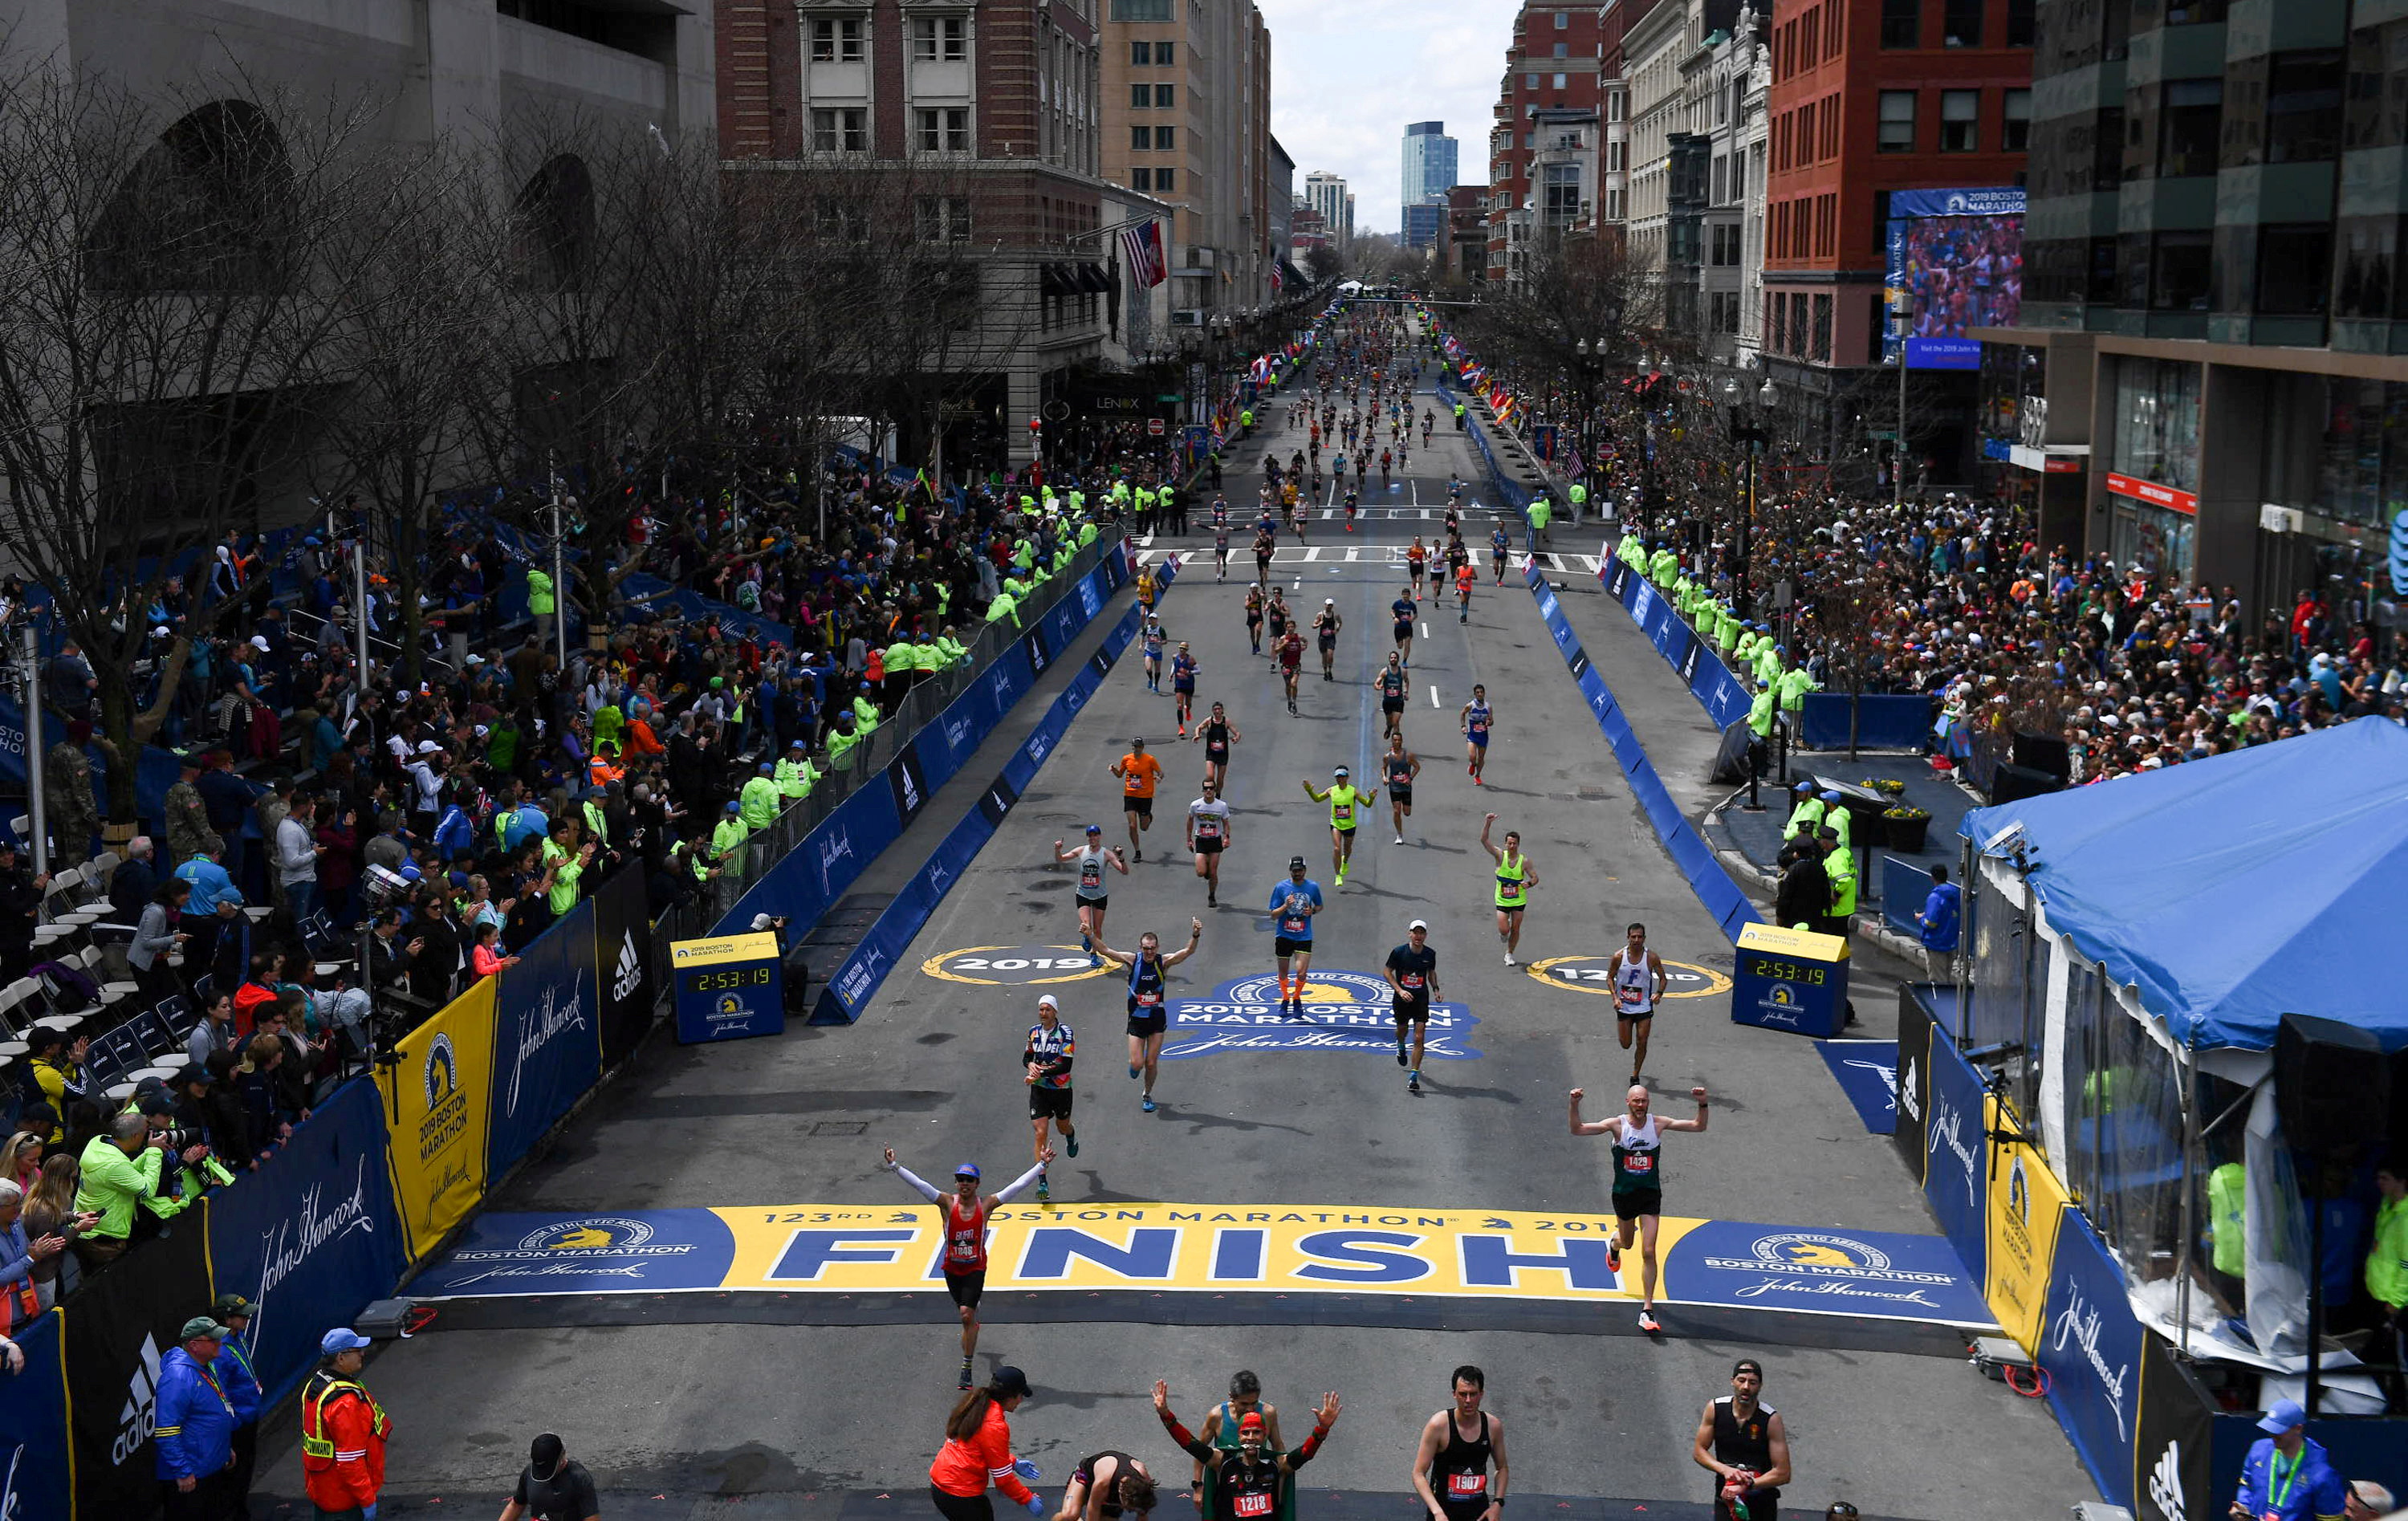 Boston Marathon runners must be vaccinated or provide negative COVID19